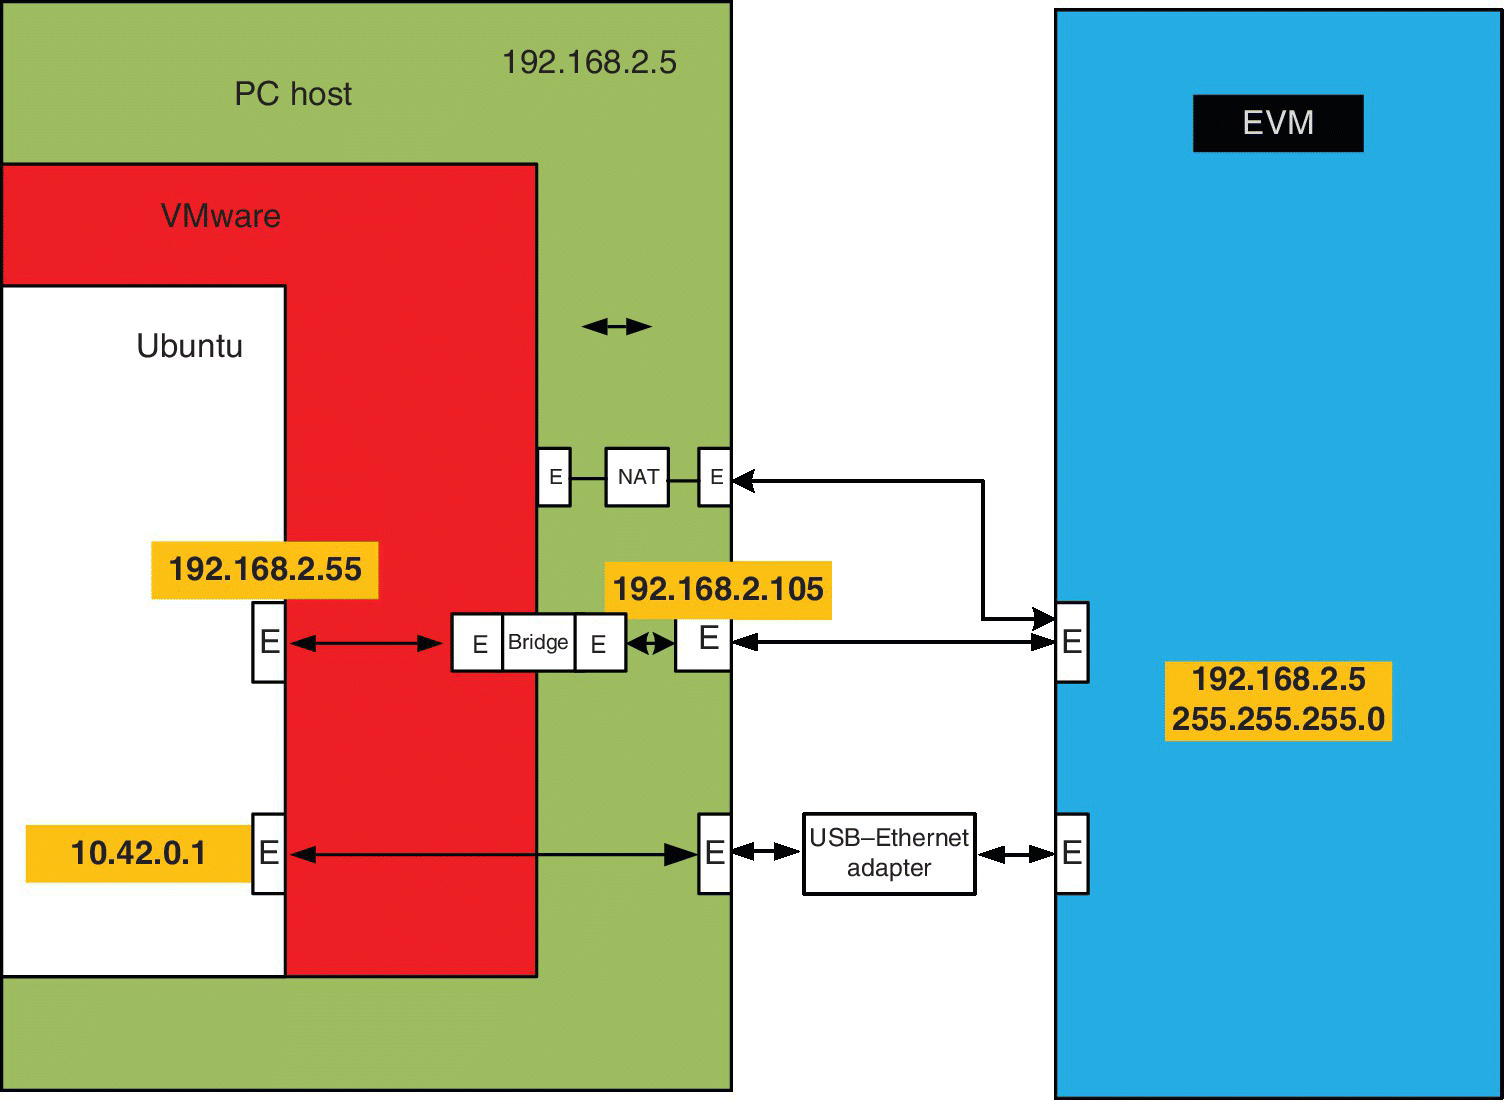 Diagram of IP addresses used in this experiment, displaying shaded boxes with labels PC host, VMware, Ubuntu, and EVM connected by double-headed arrows.